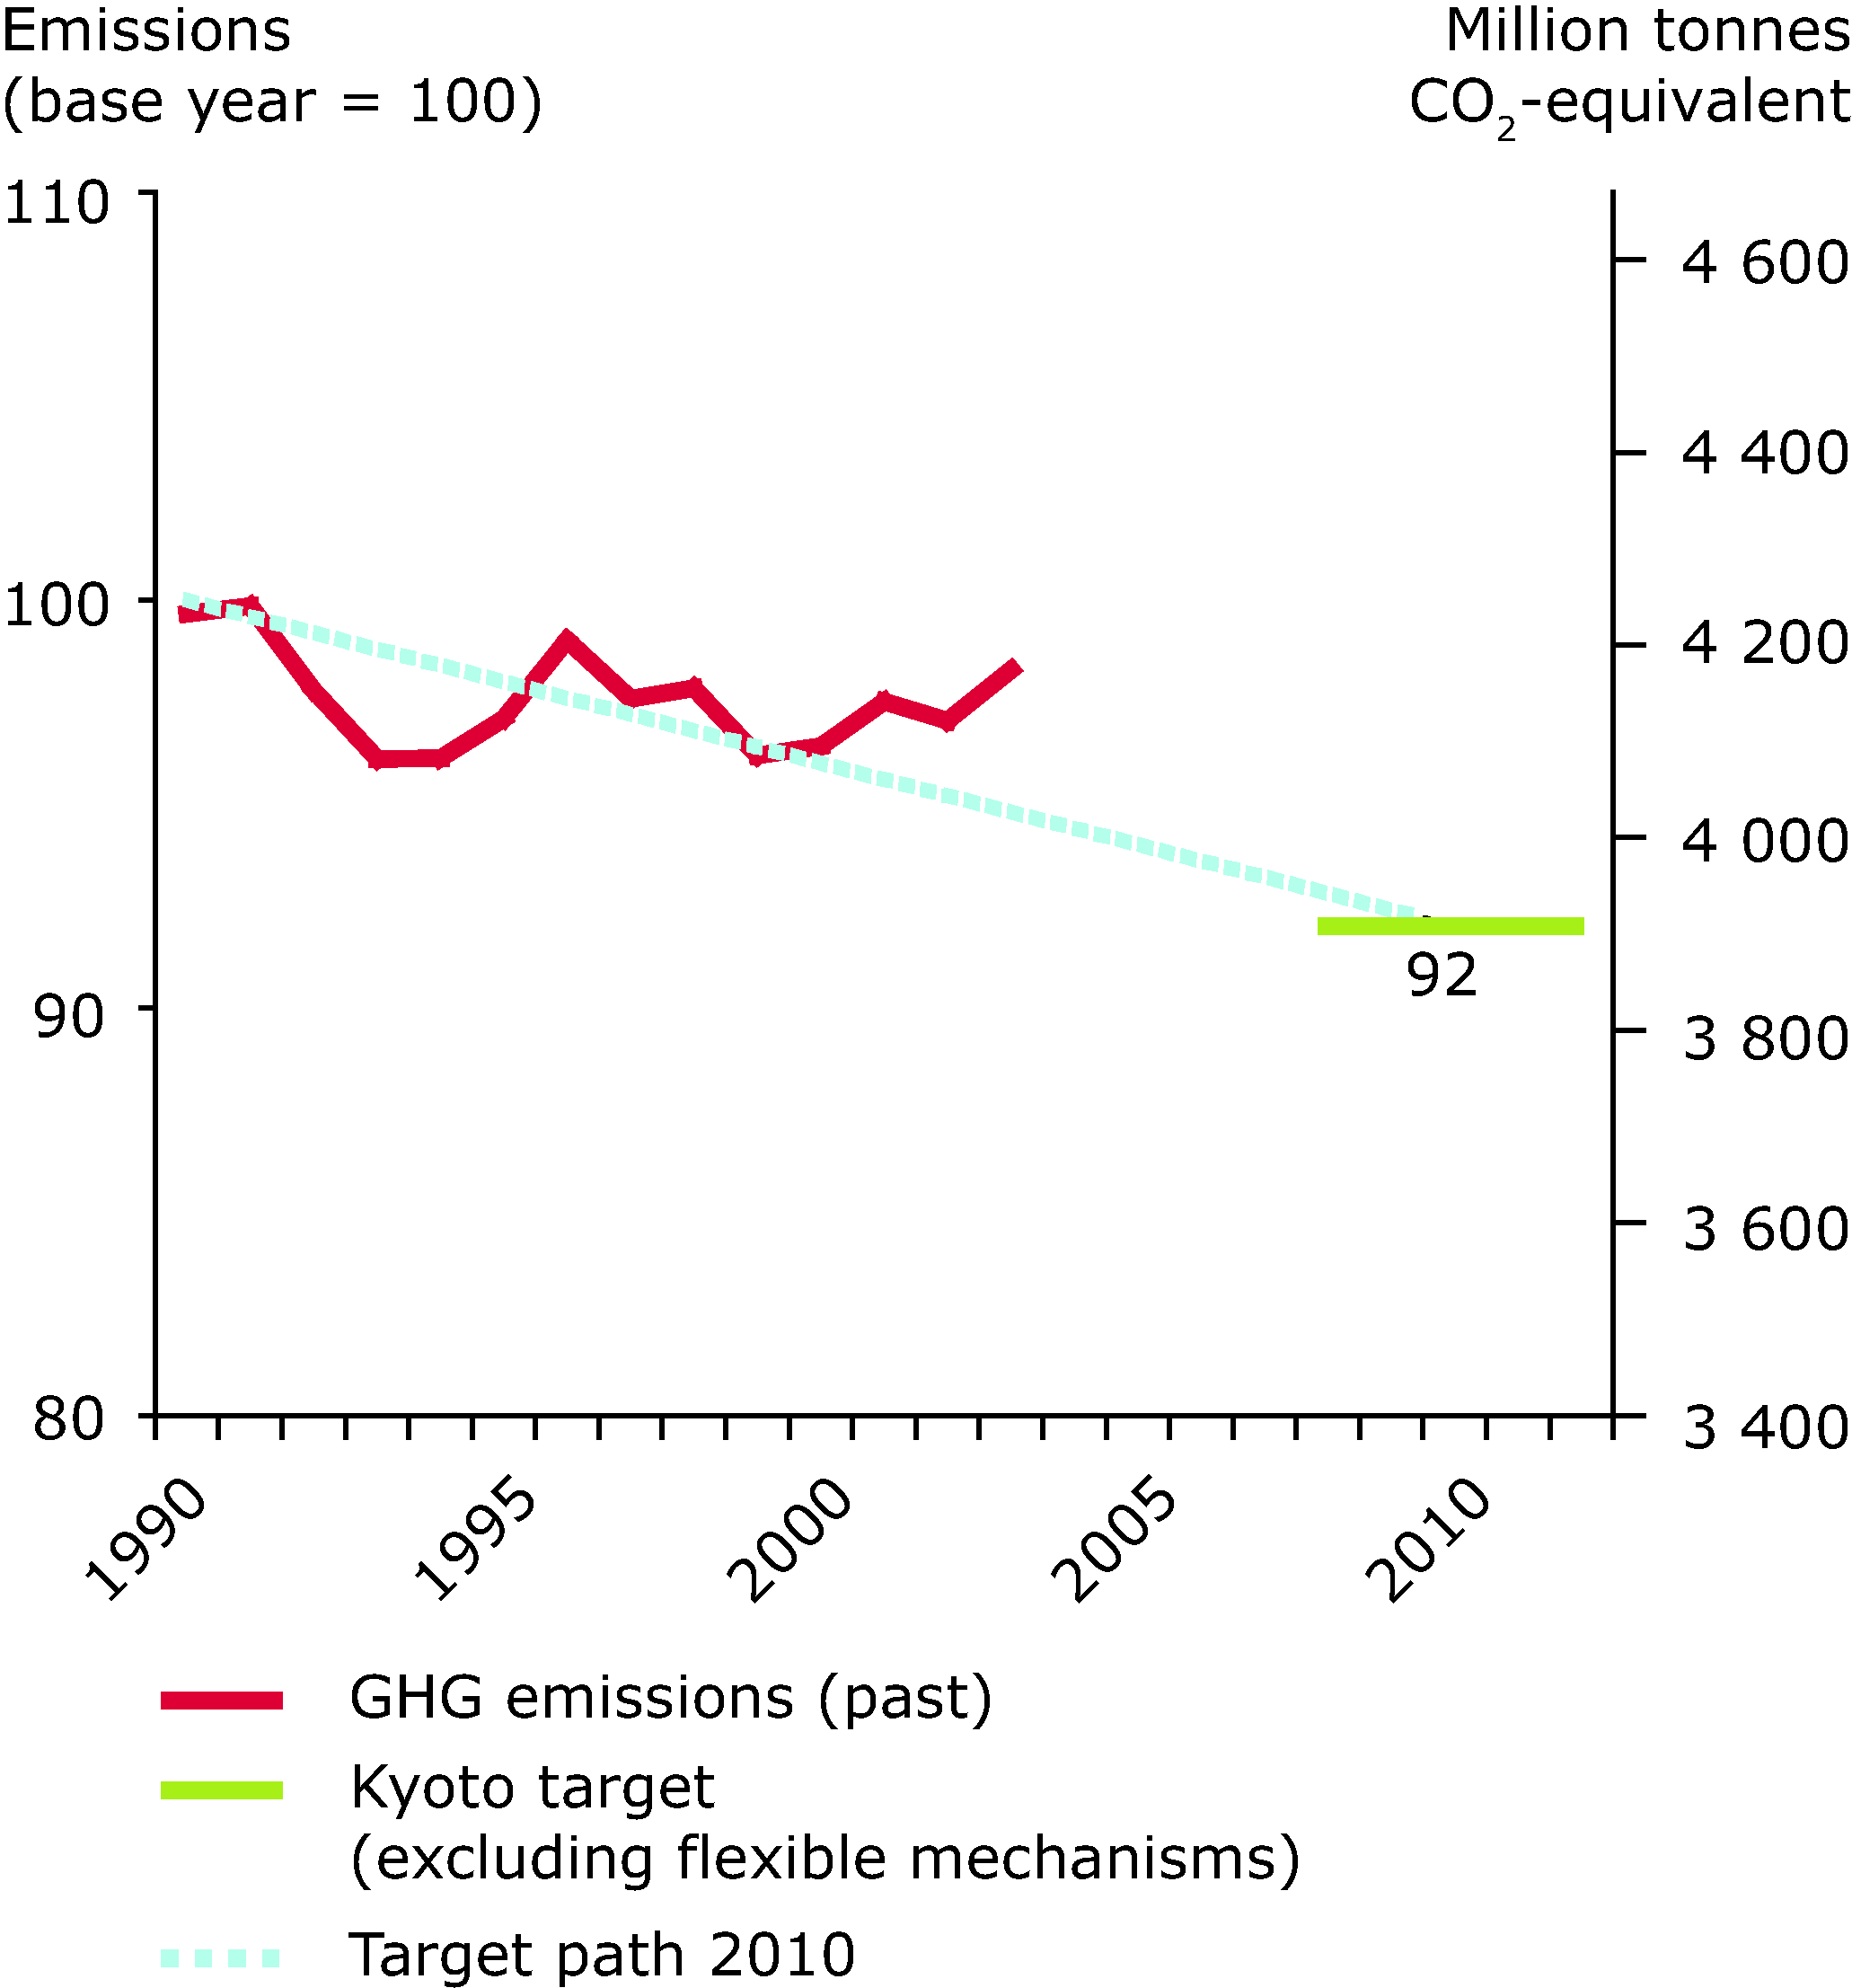 Development of EU-15 greenhouse gas emissions from base year to 2003 and distance to the (hypothetical) linear EU Kyoto target path (excluding flexible mechanisms)